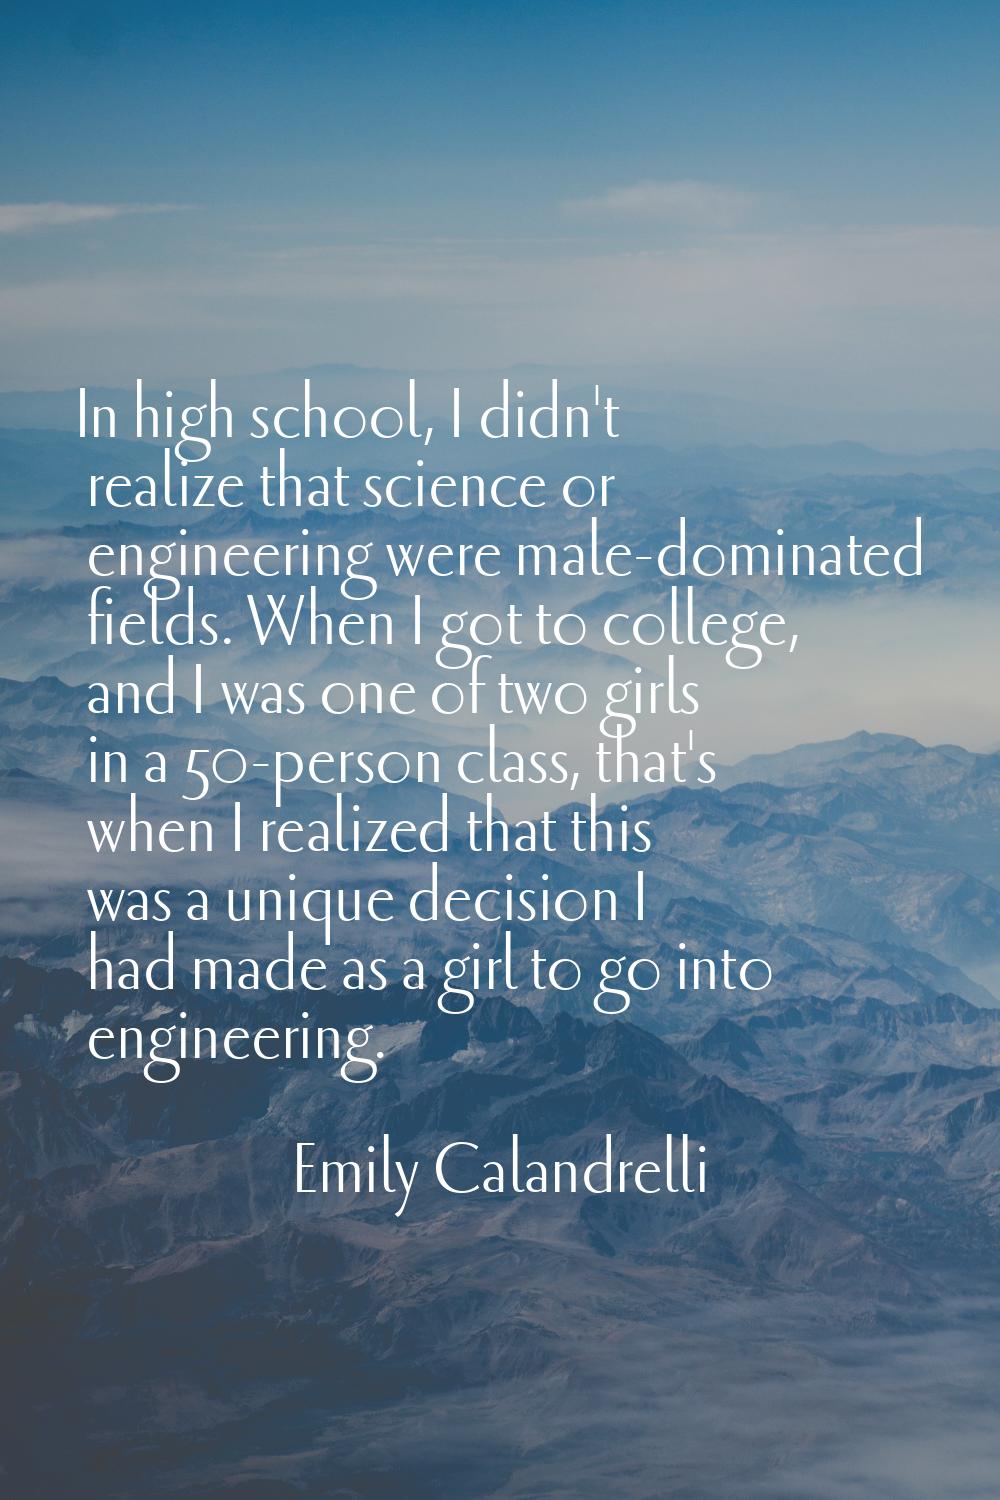 In high school, I didn't realize that science or engineering were male-dominated fields. When I got